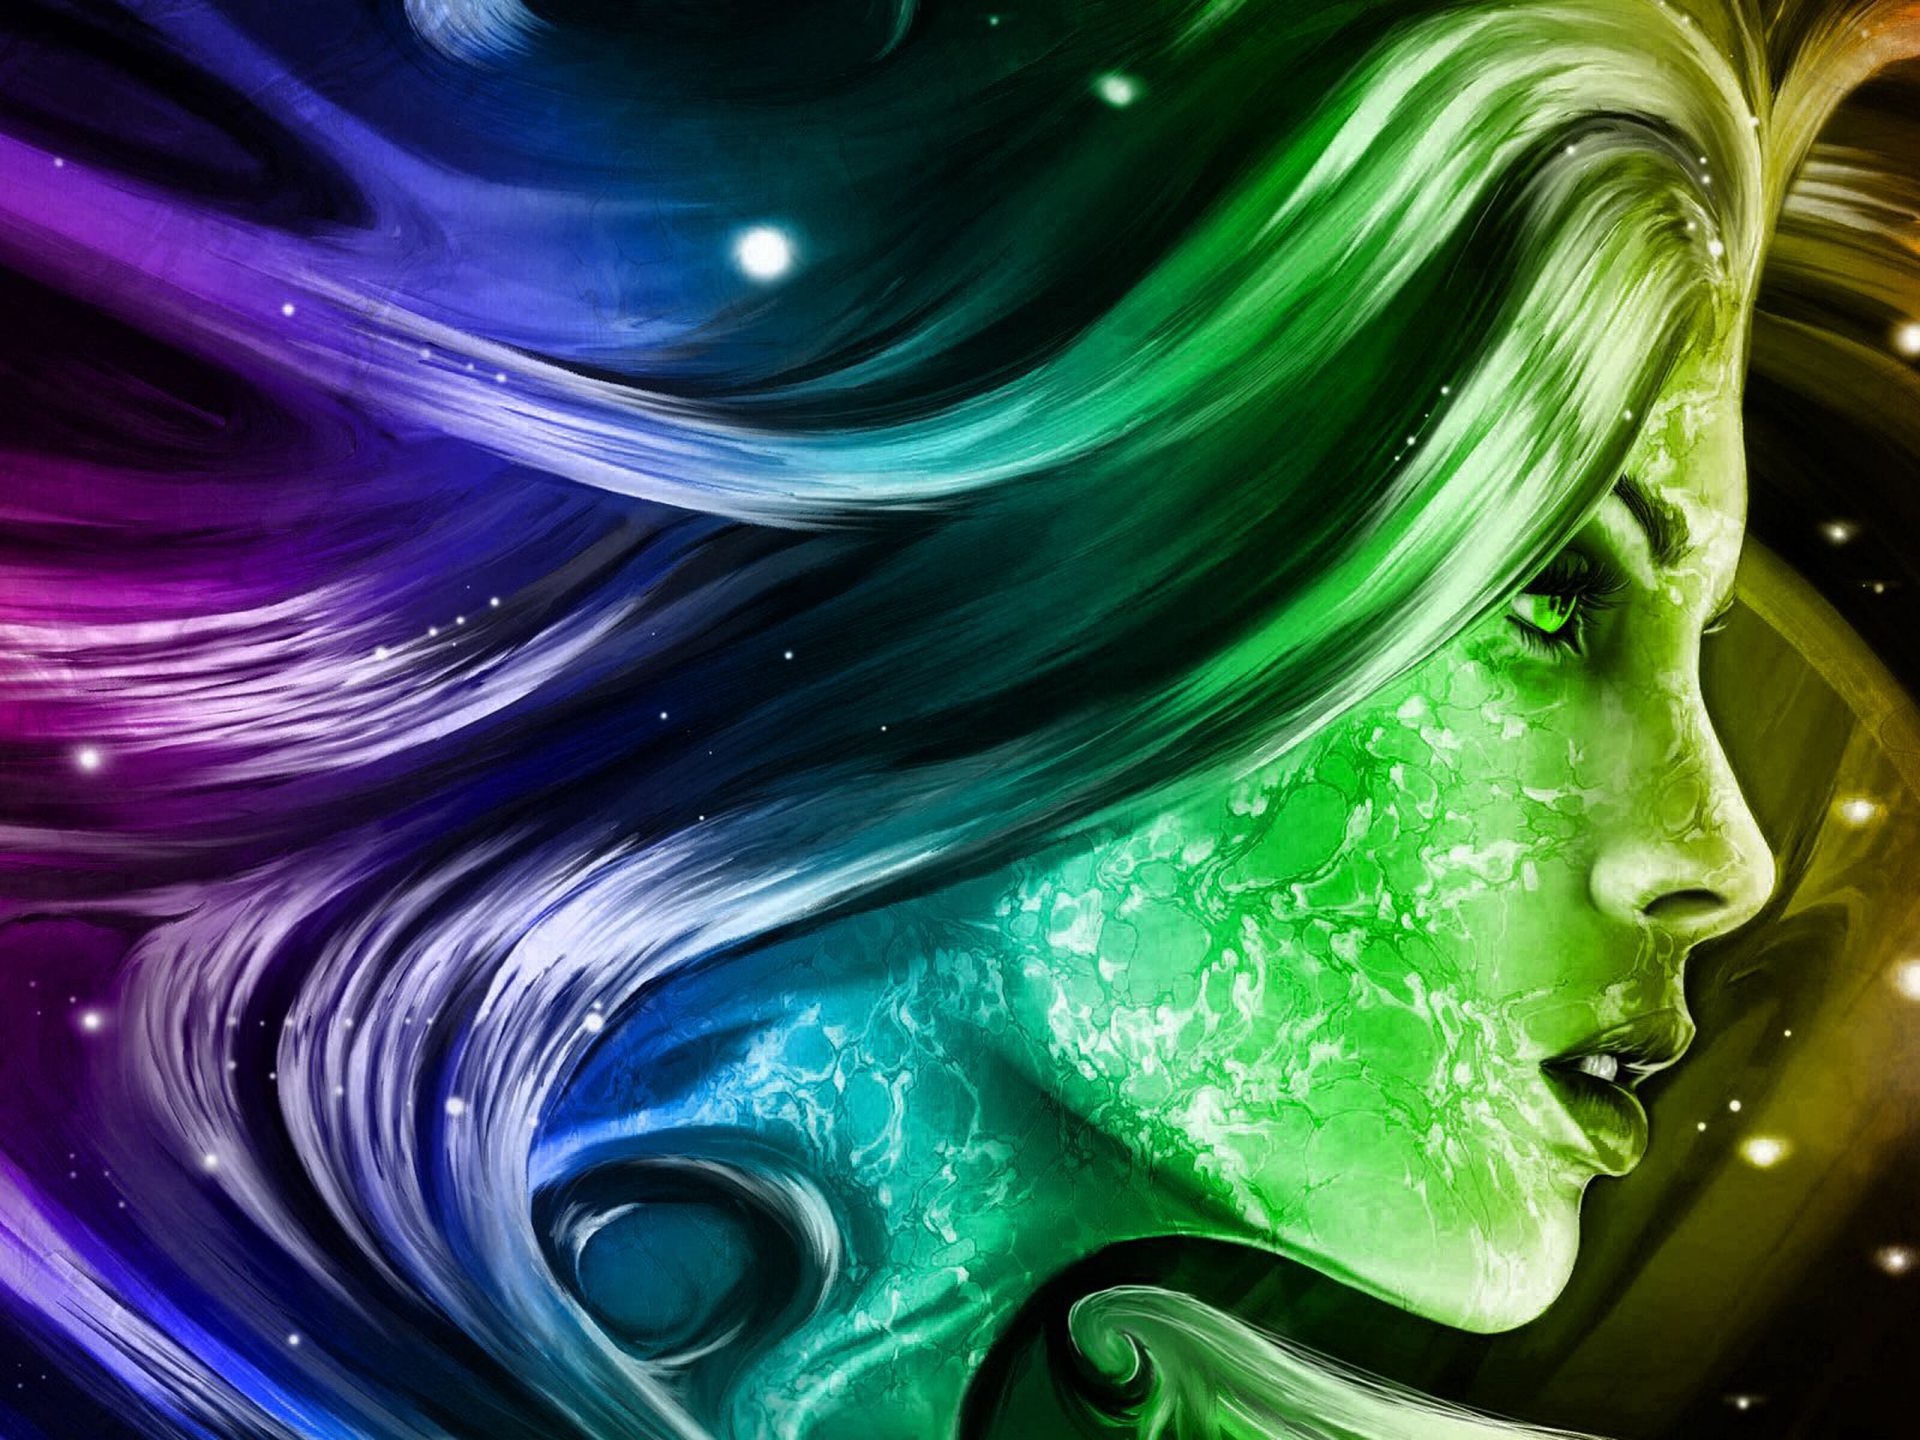 graphics wallpapers for mobile,green,blue,water,purple,fractal art